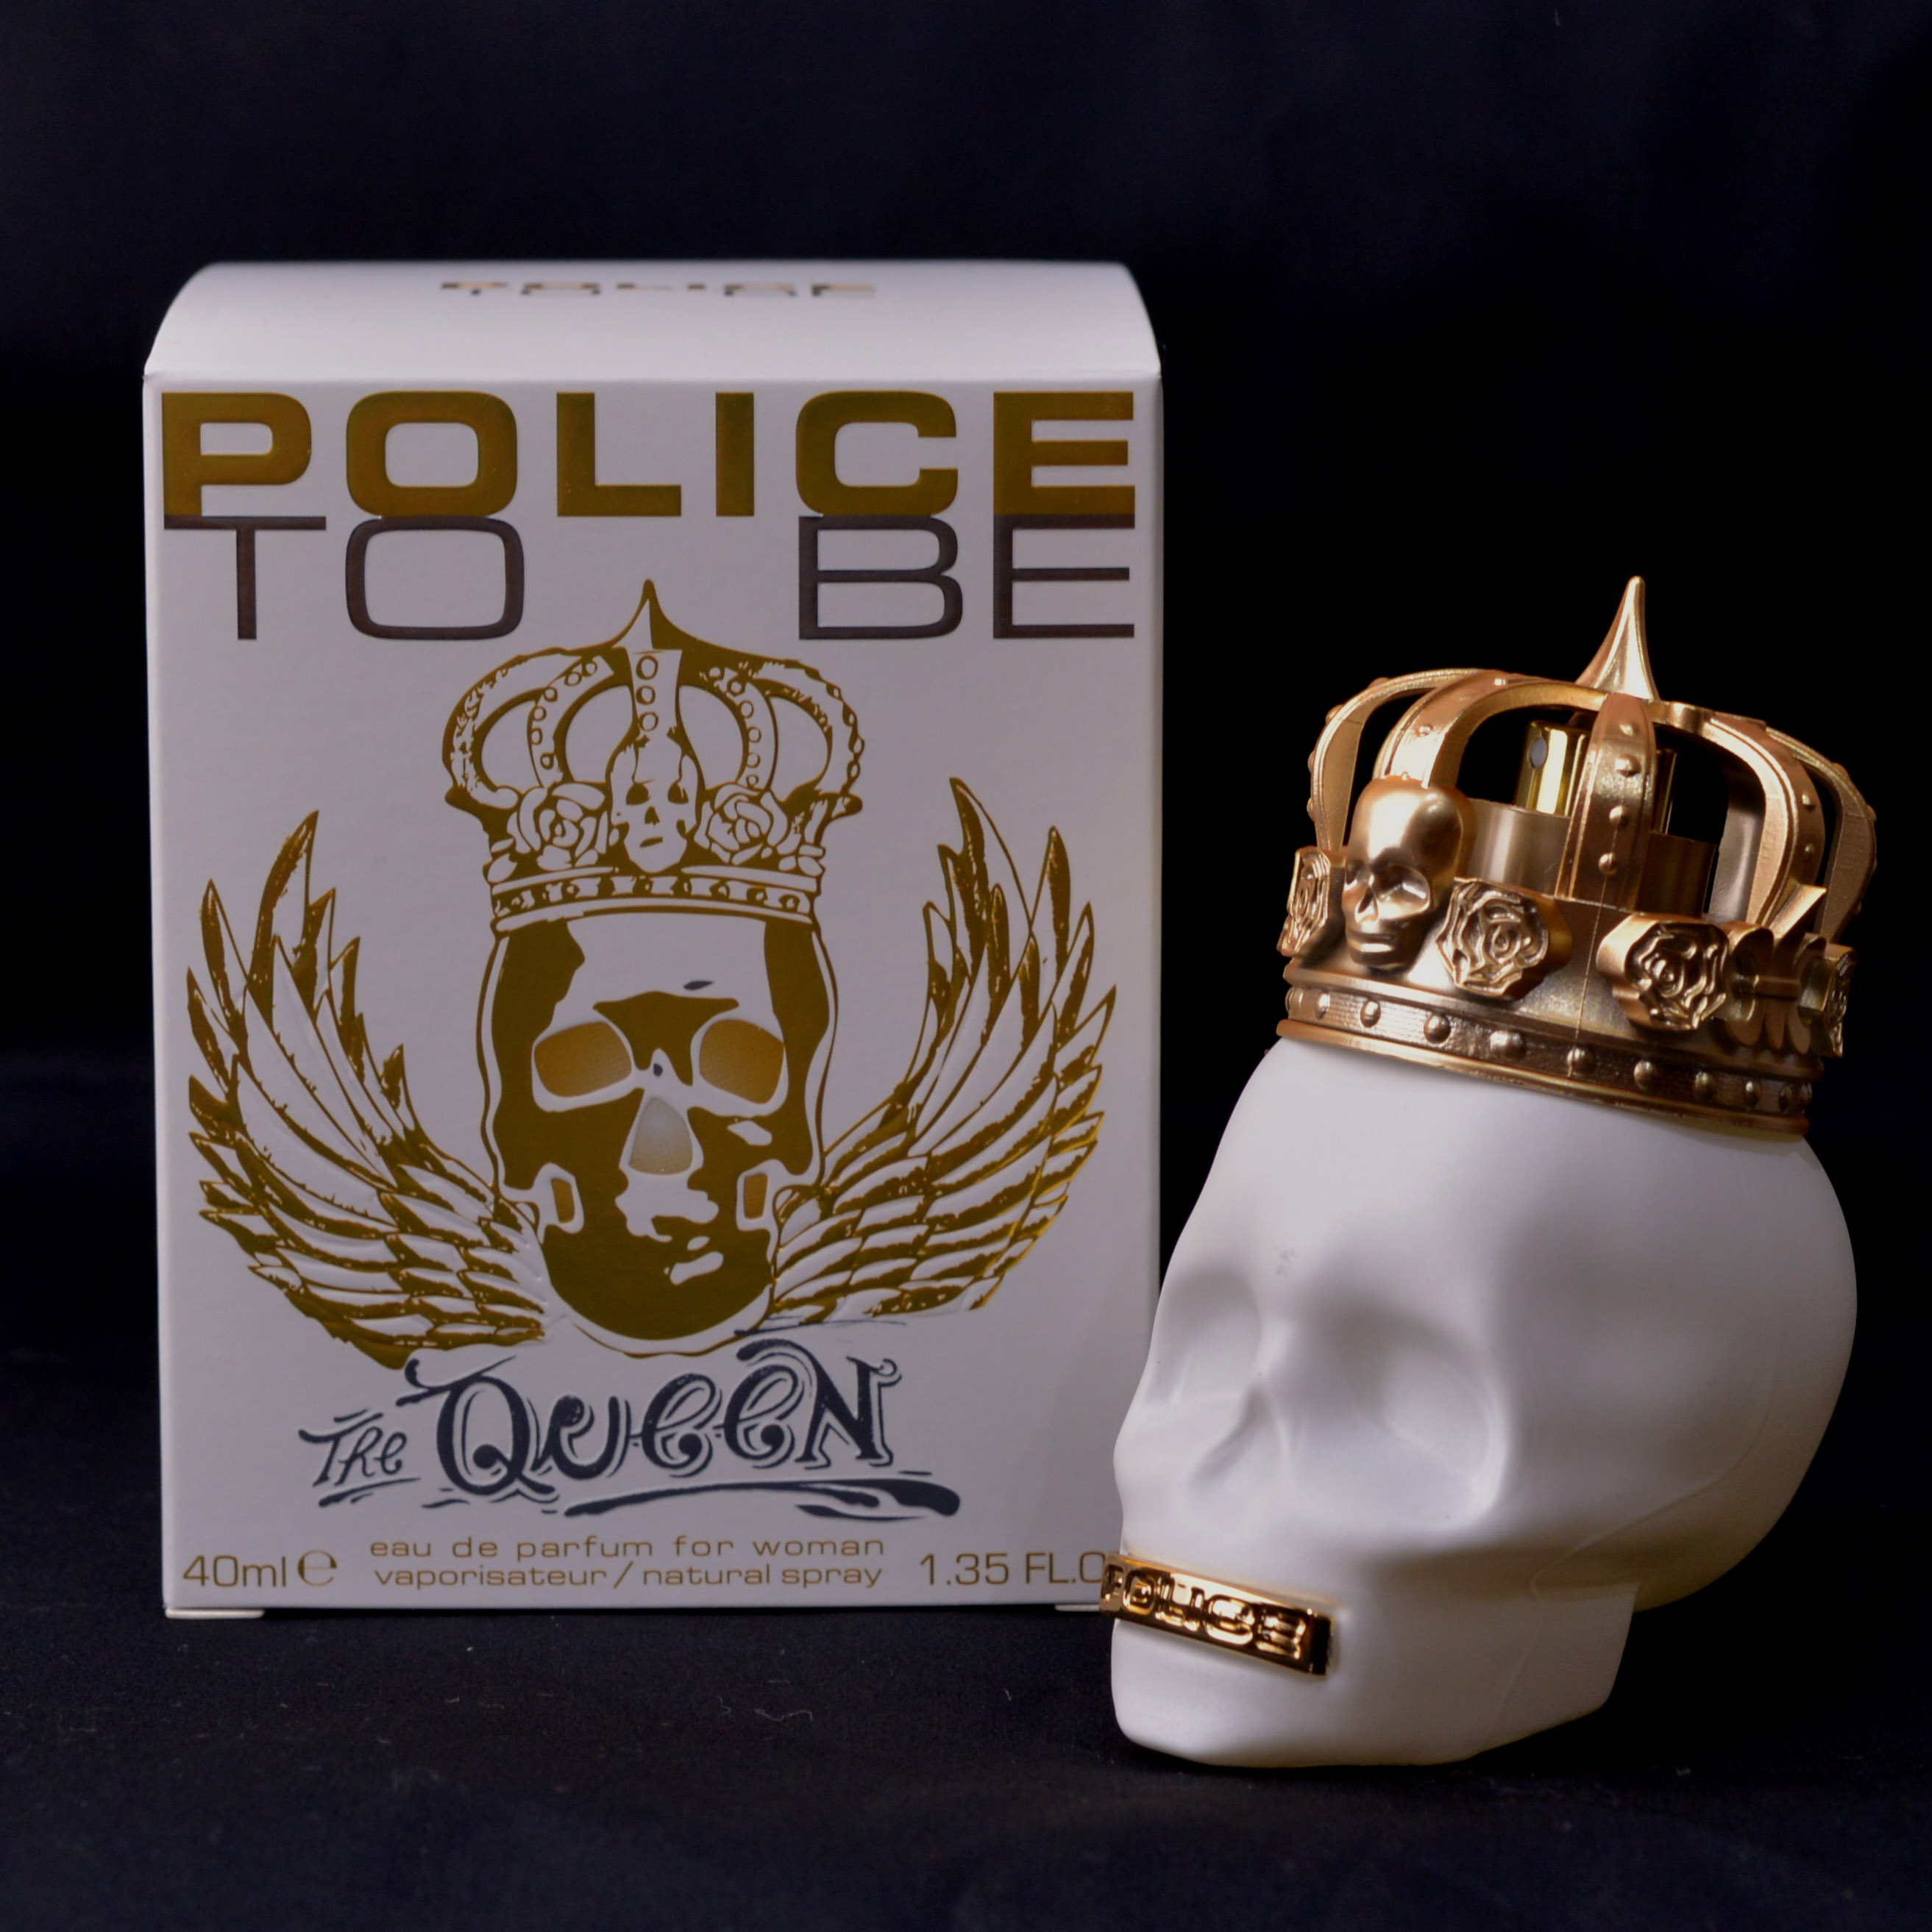 http://www.police.ne.jp/images/police_perfume_to_be_qeen_01.jpg